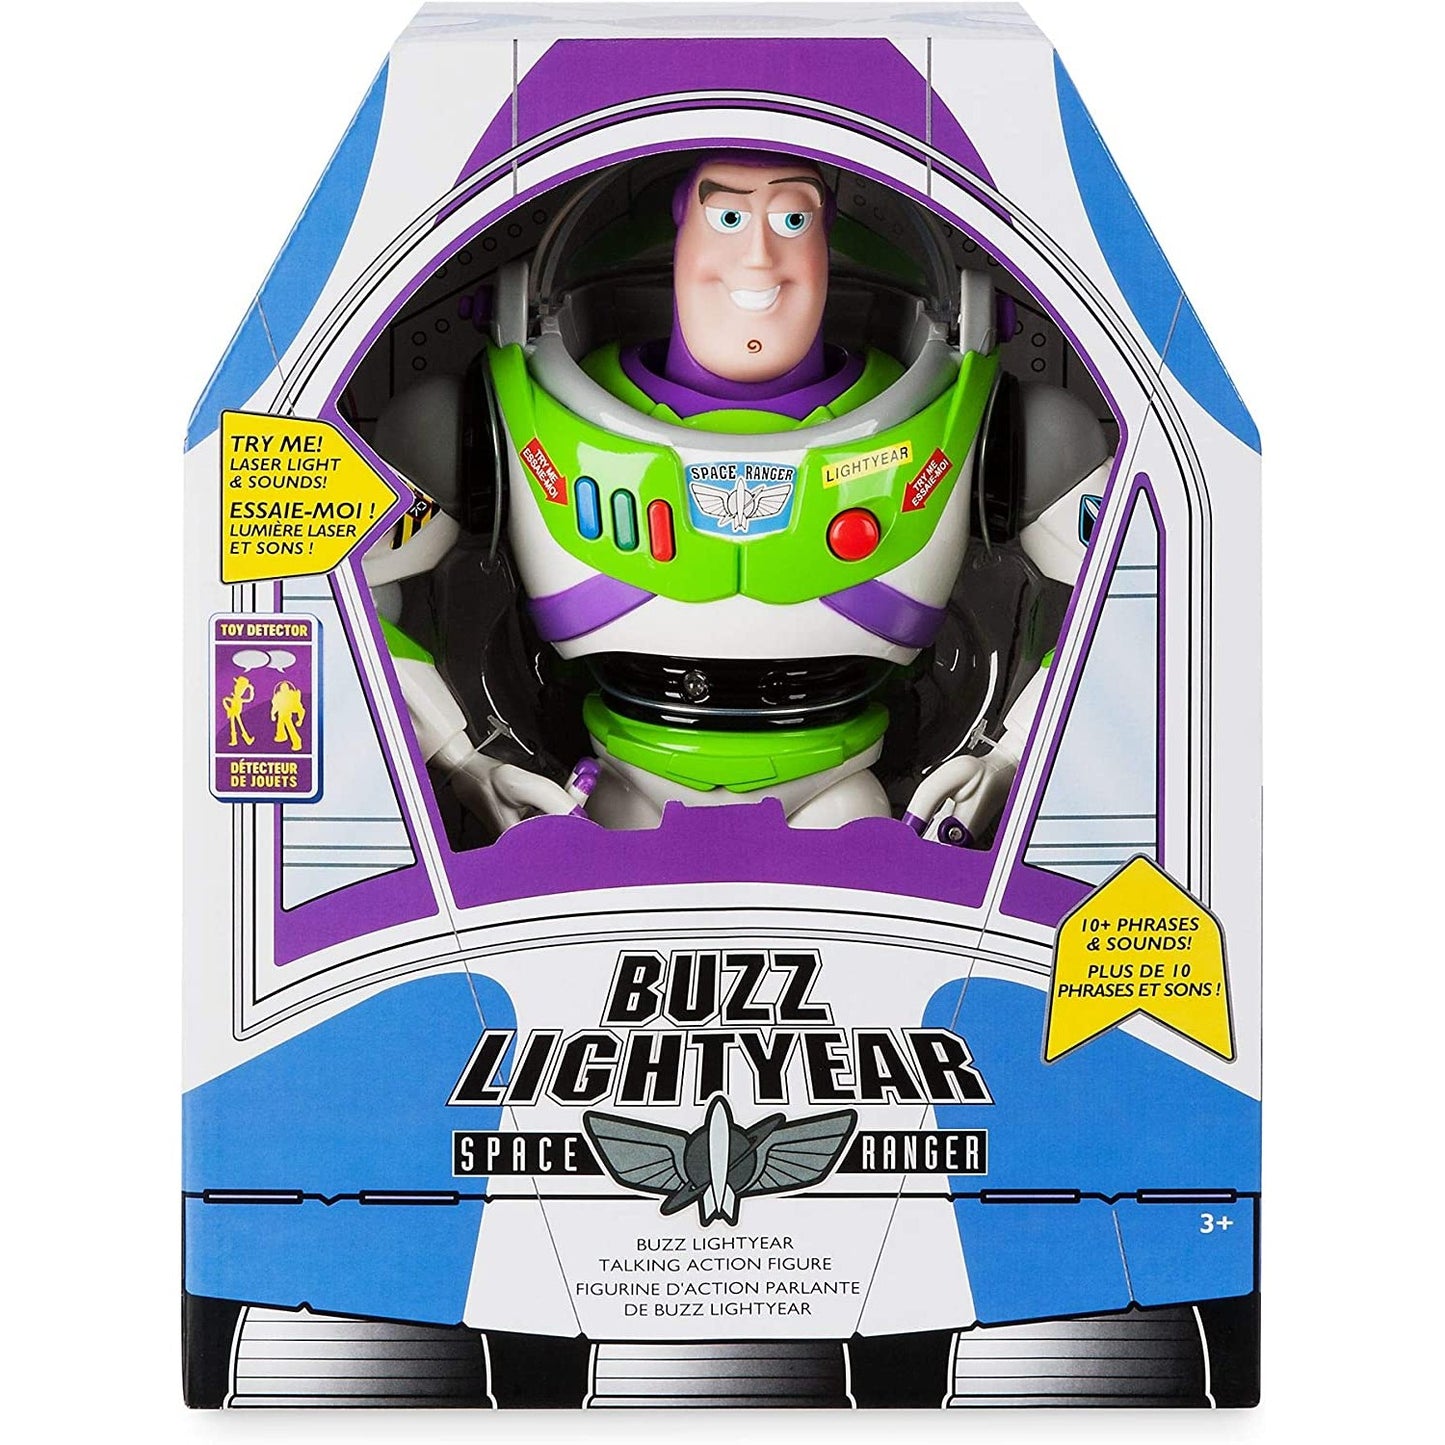 Disney Store Official Buzz Lightyear Interactive Talking Action Figure.